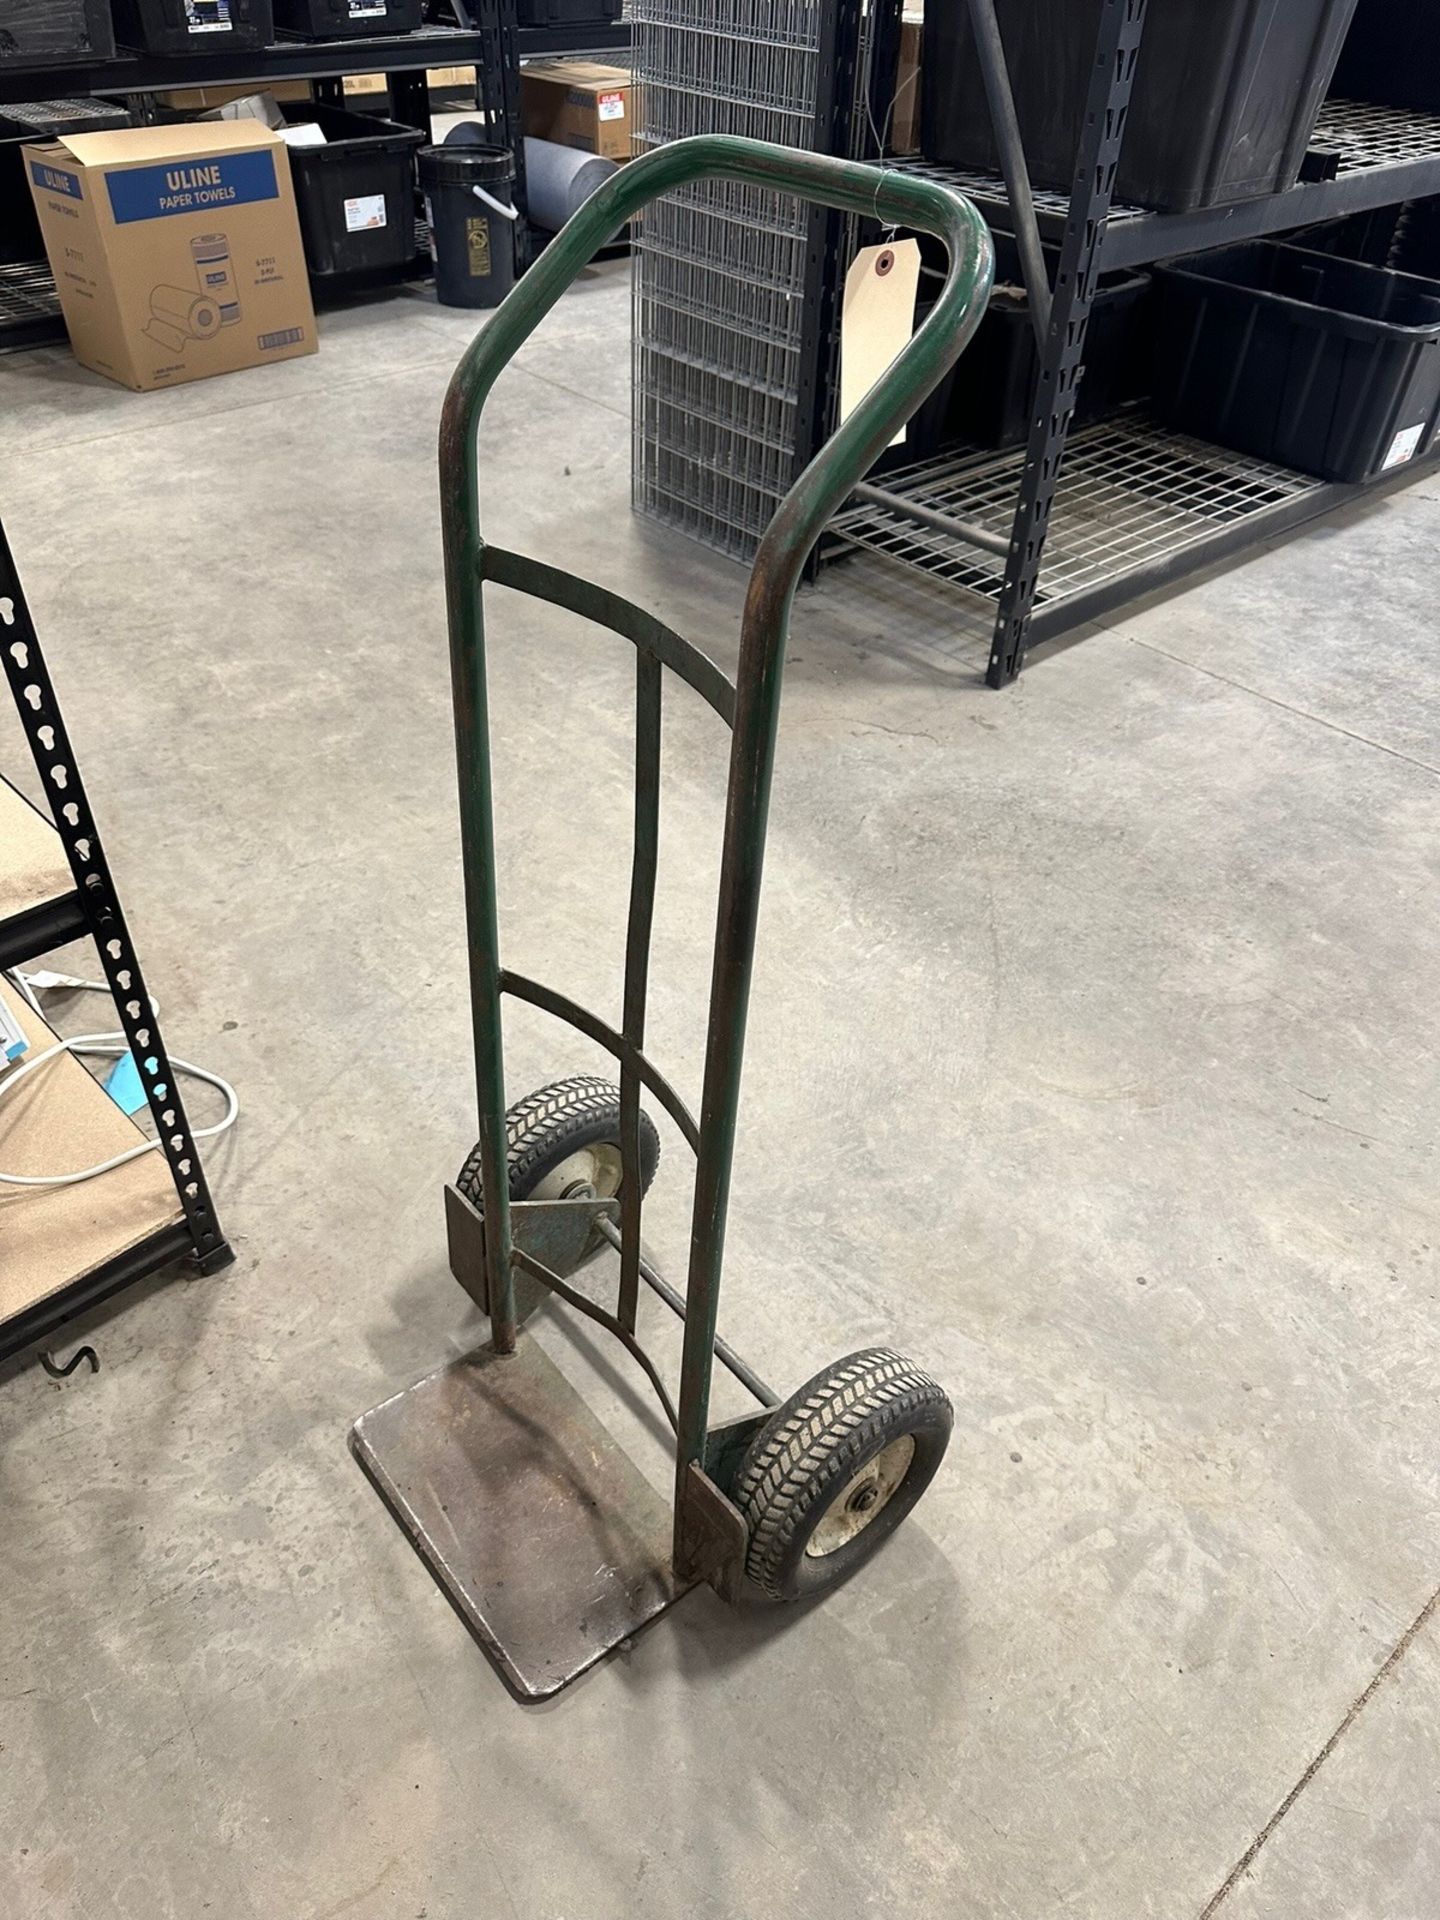 2 Wheel Furniture Dolly | Rig Fee $35 - Image 2 of 2